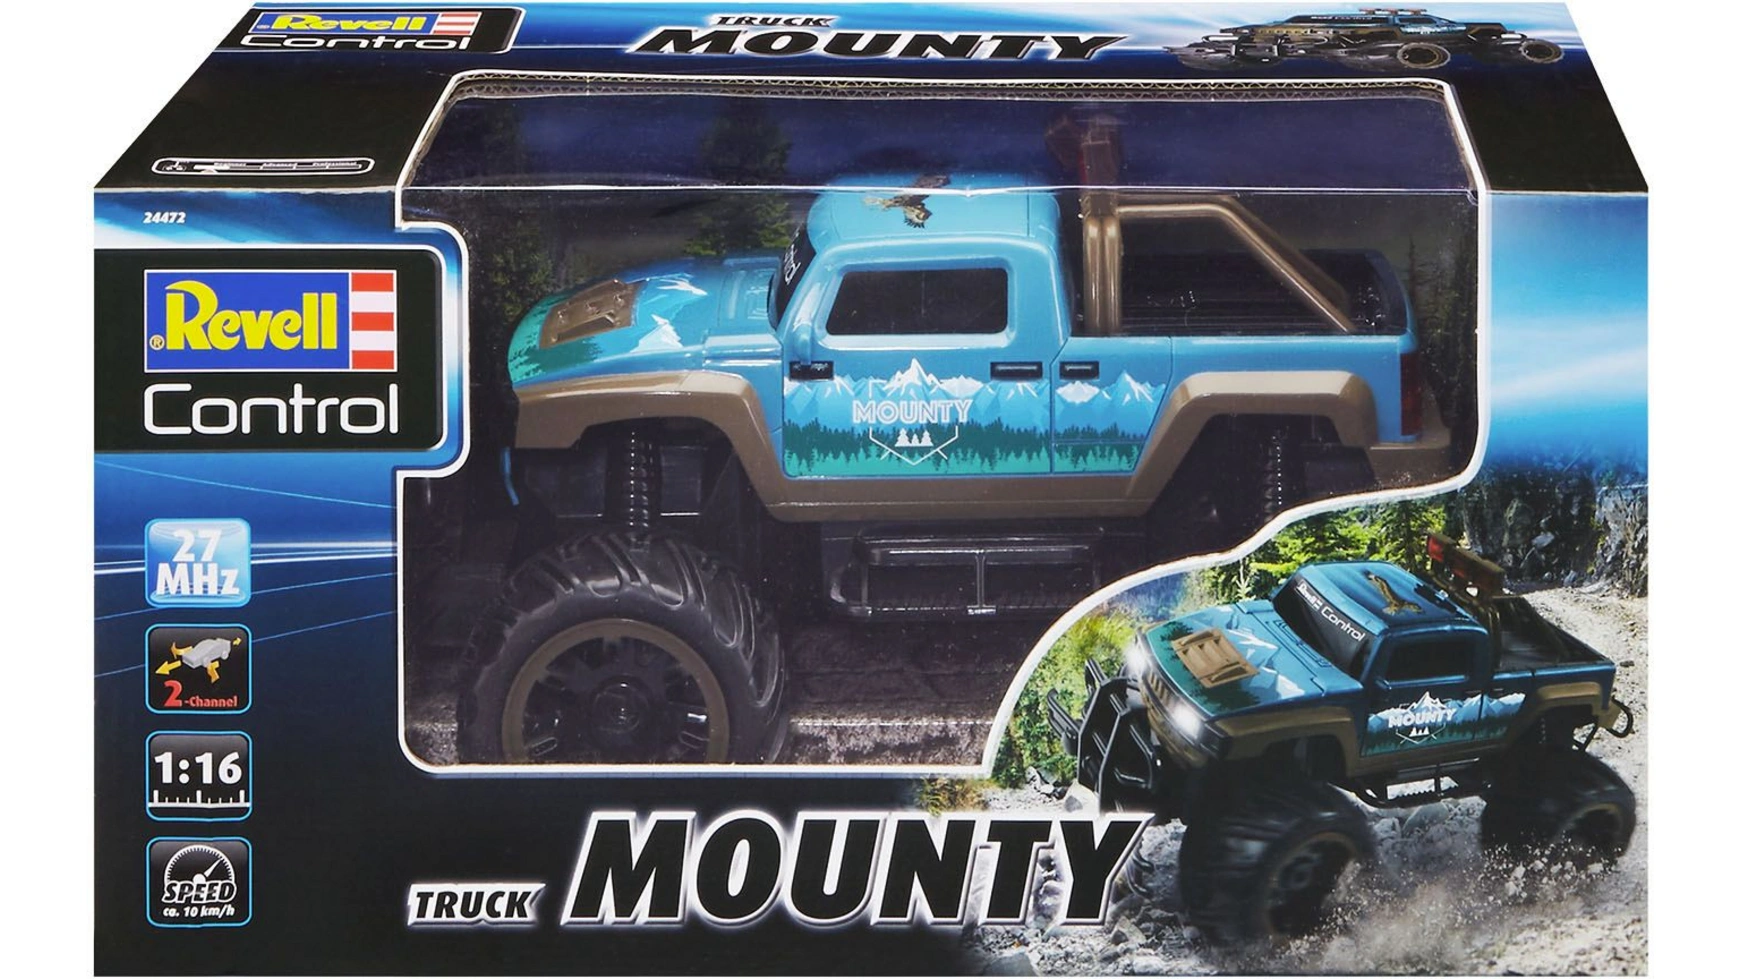 Revell Control RC Truck MOUNTY rc oil 50w 100w 500w 1000w cst differential oil grease lock mud fluid viscosity for1 10 1 8 rc drift monster truck rally crawler